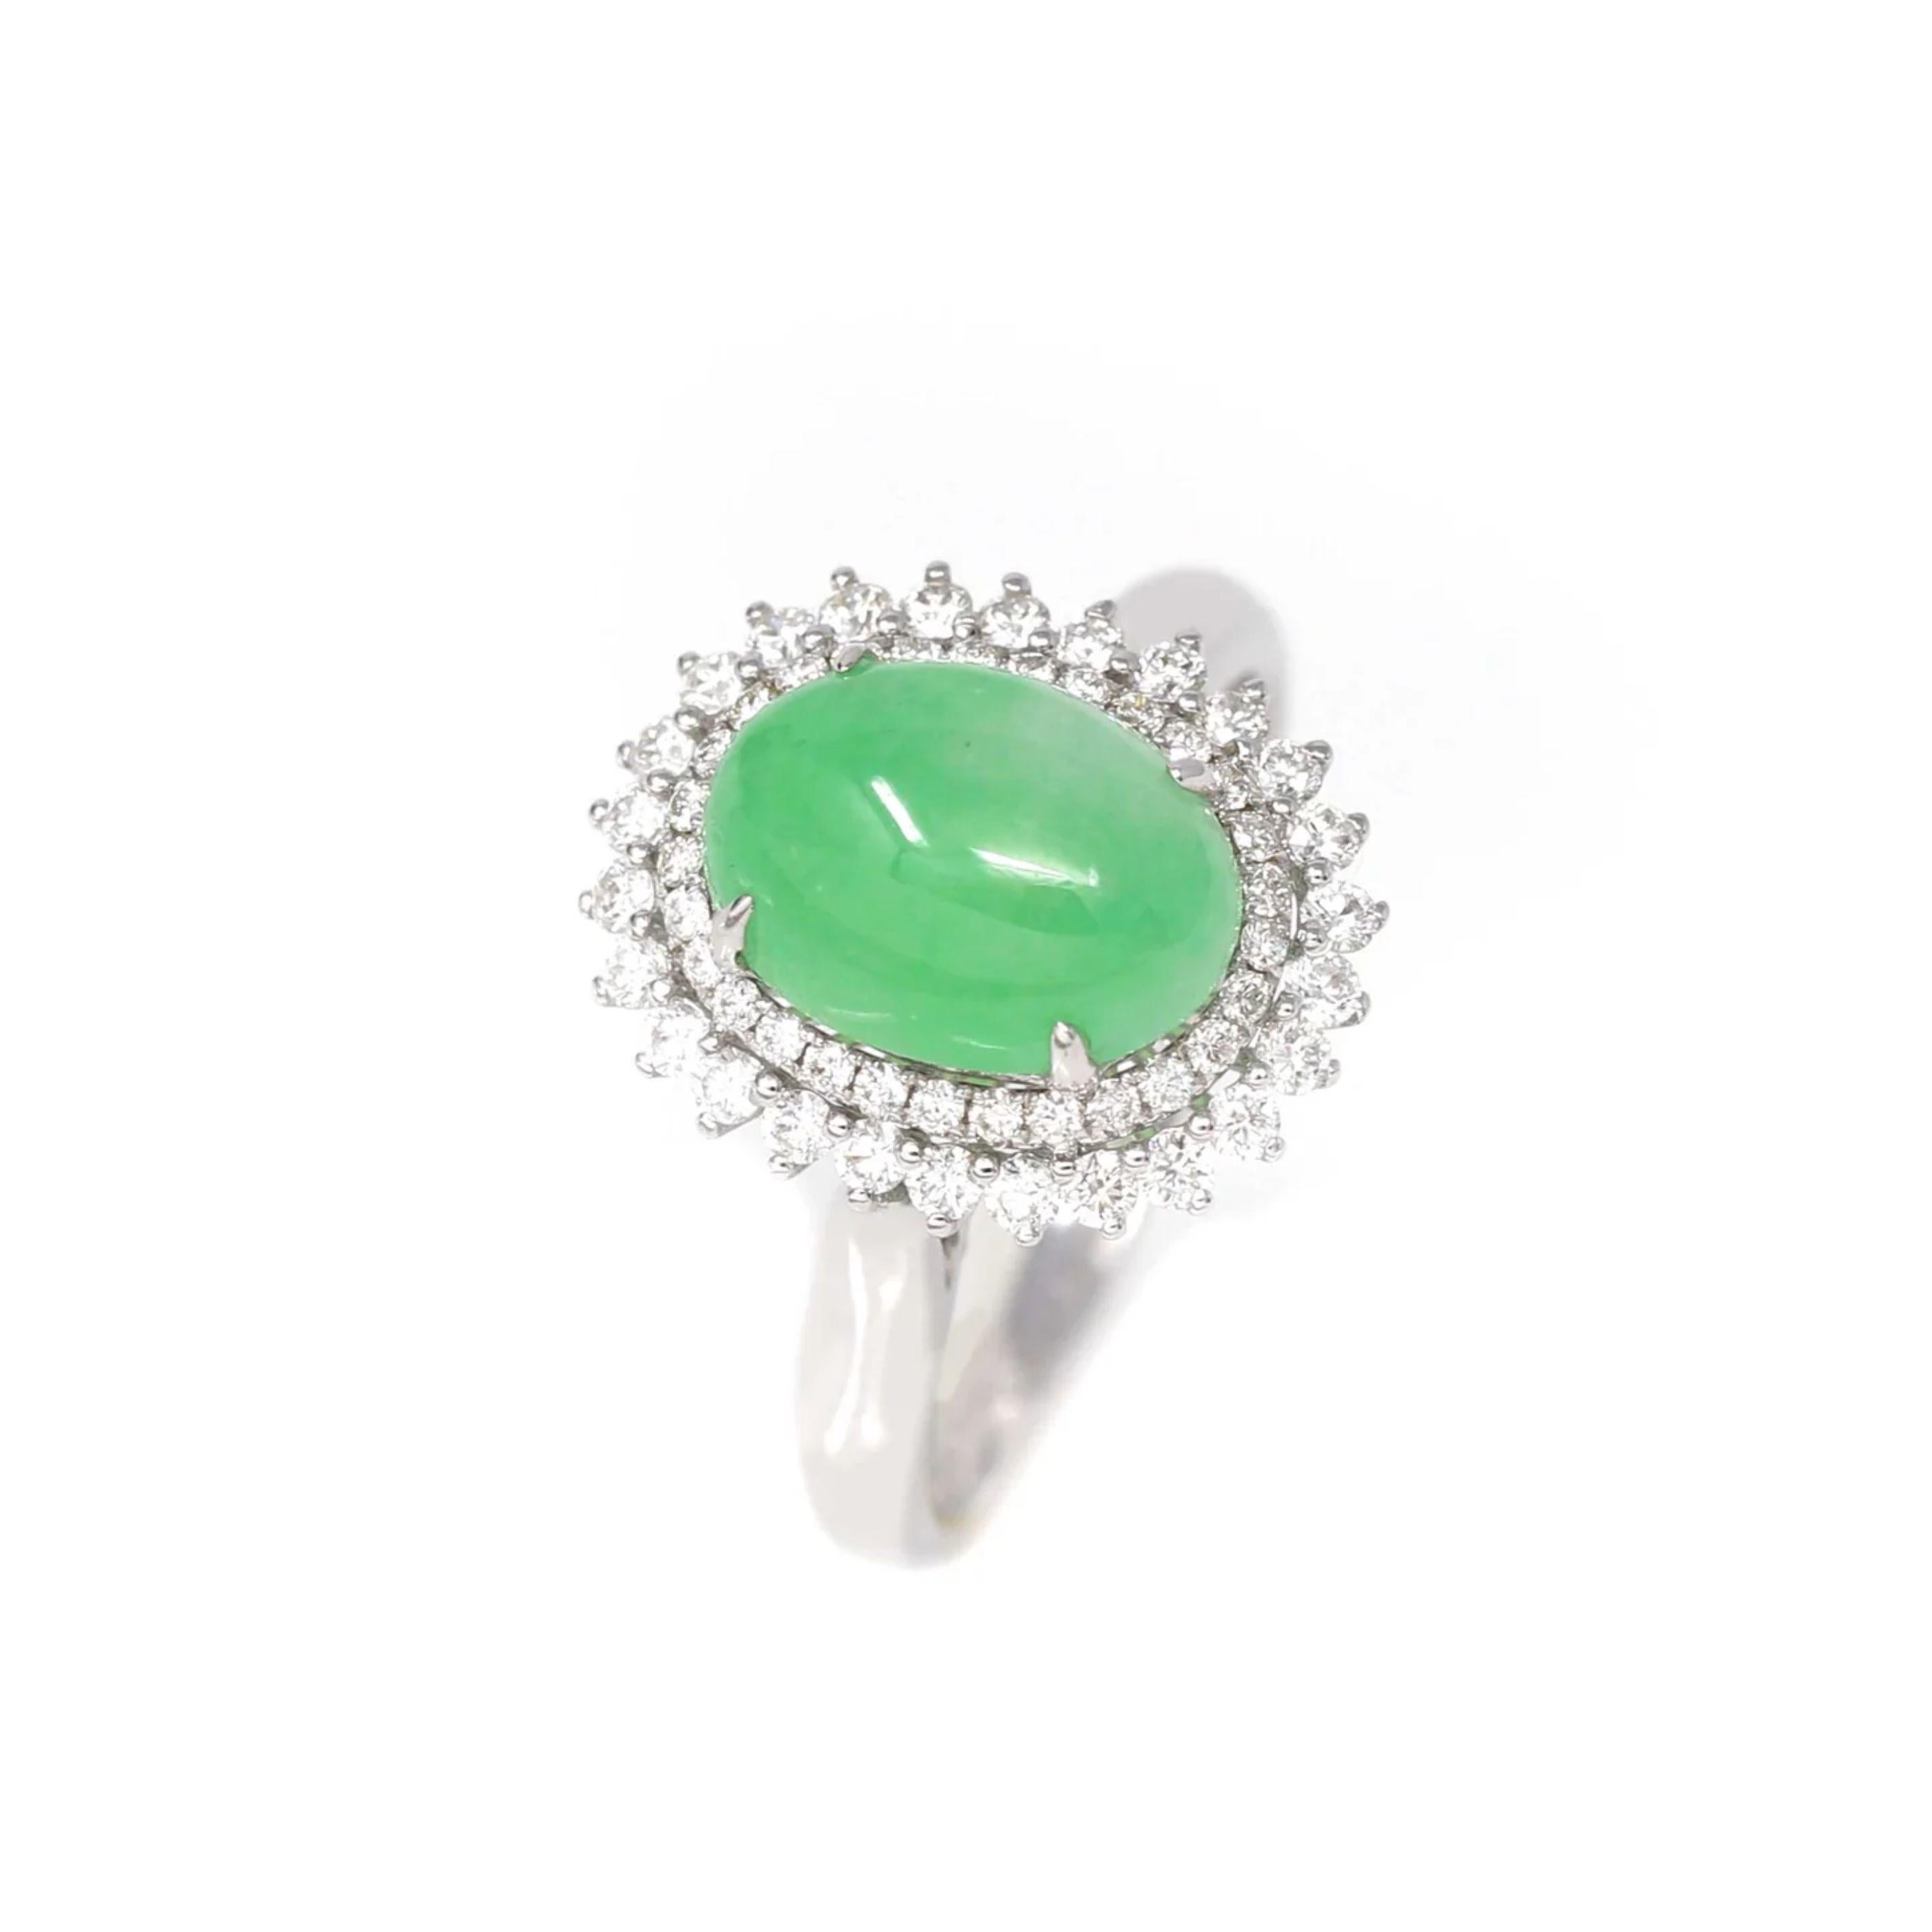 ORIGINAL DESIGN --- Inspired by the natural beauty of genuine Burmese Imperial Green Jadeite, the rich, beautiful apple green color is found on no other stone. This one of a kind engagement ring combines the natural beauty of the extremely rare gem